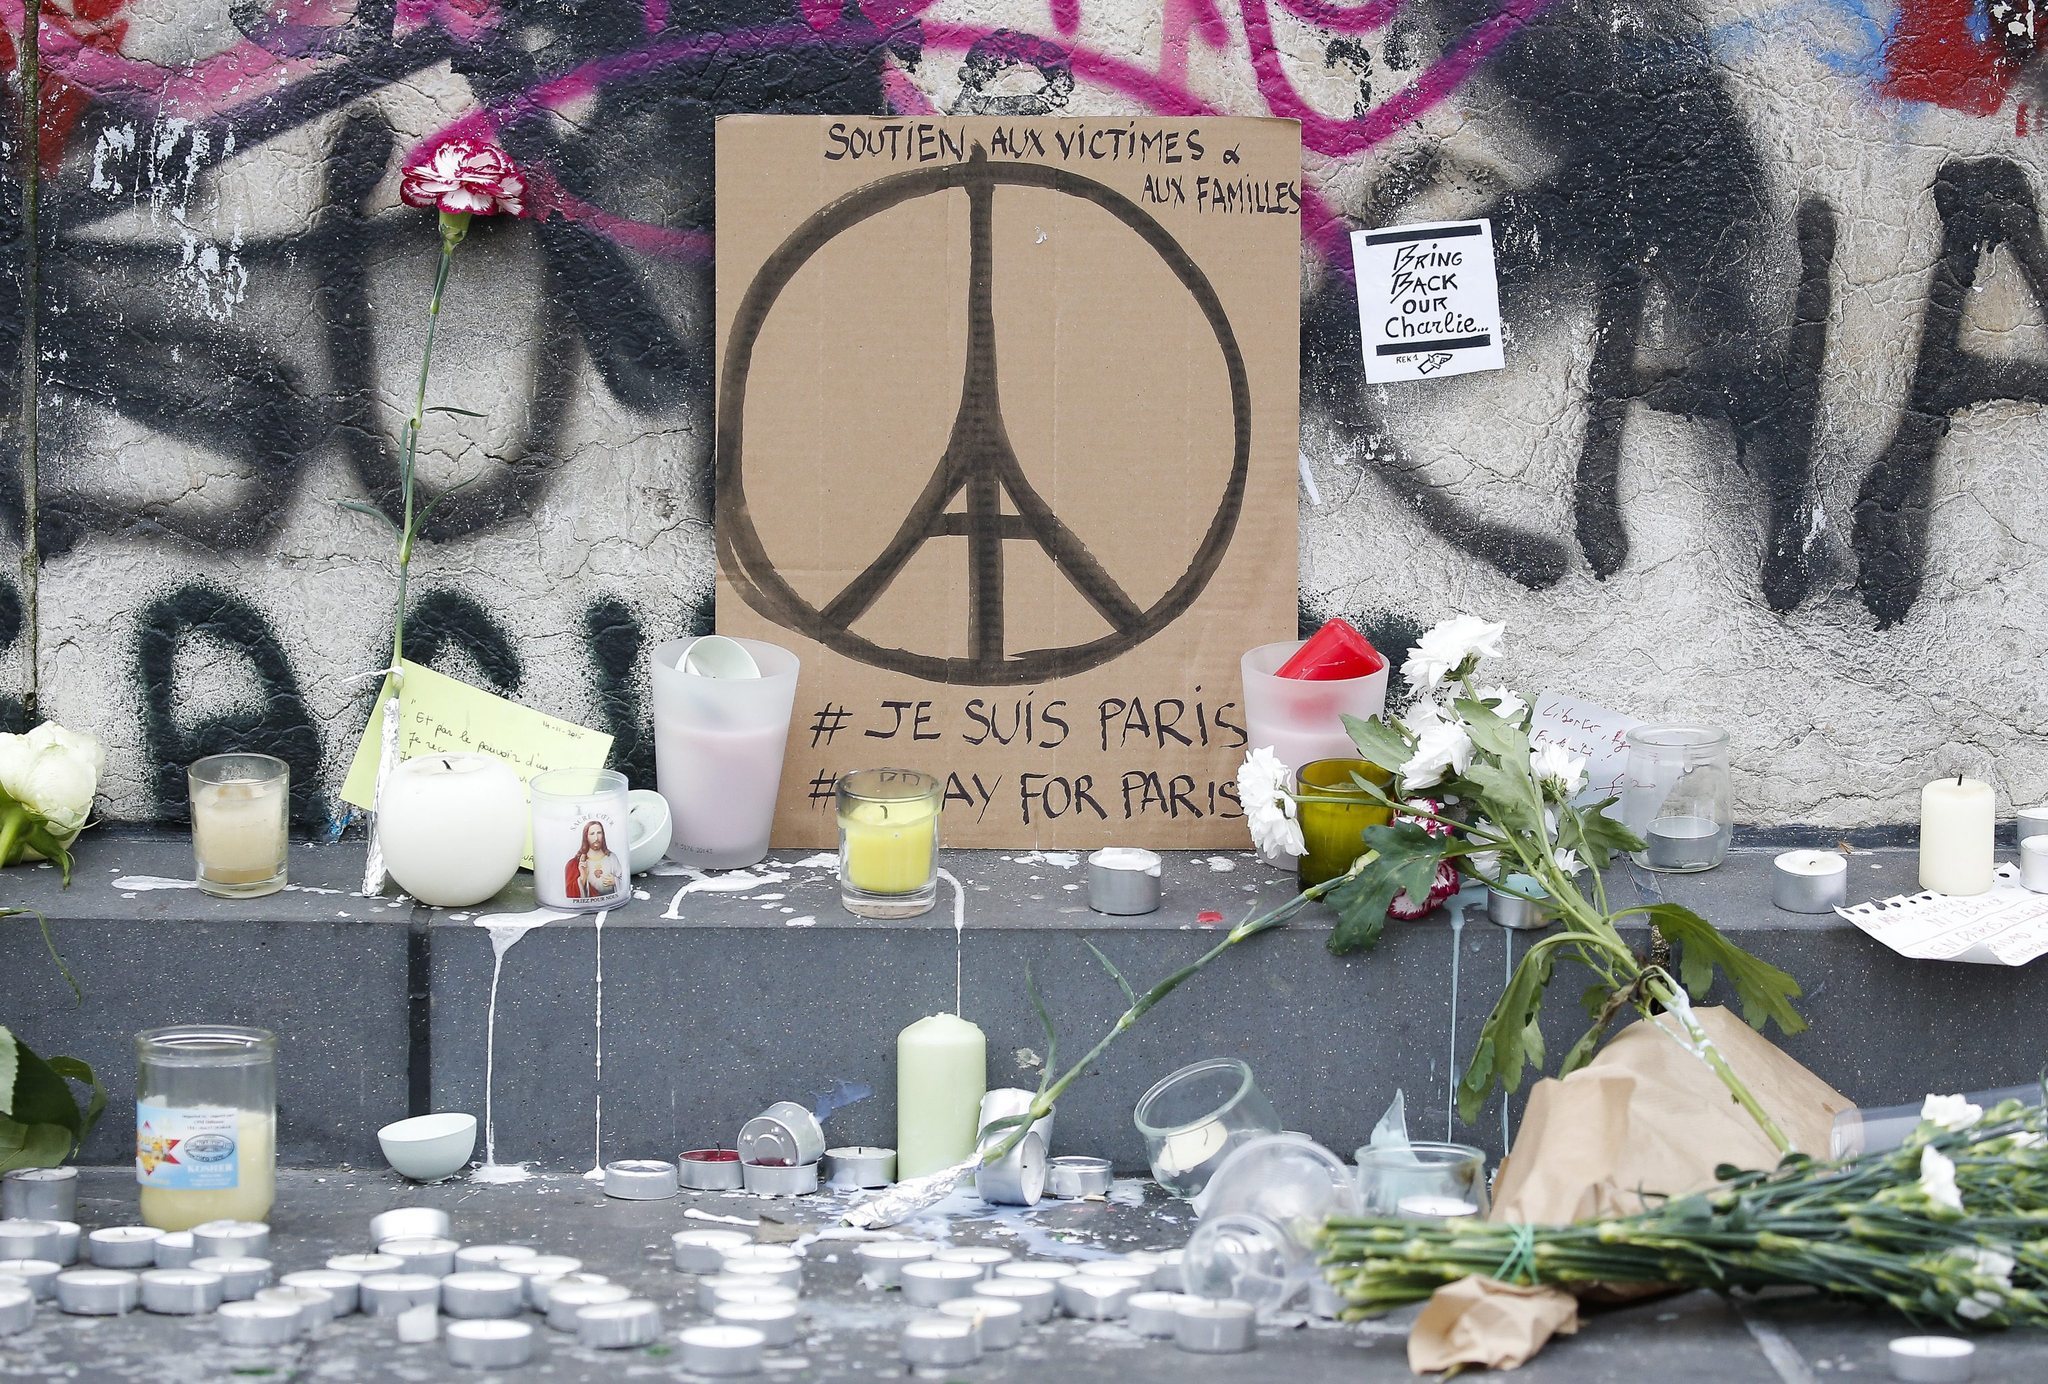 Memorial in Paris pays tribute to those killed in Friday's terror attacks. (Julien Warnand / EPA)